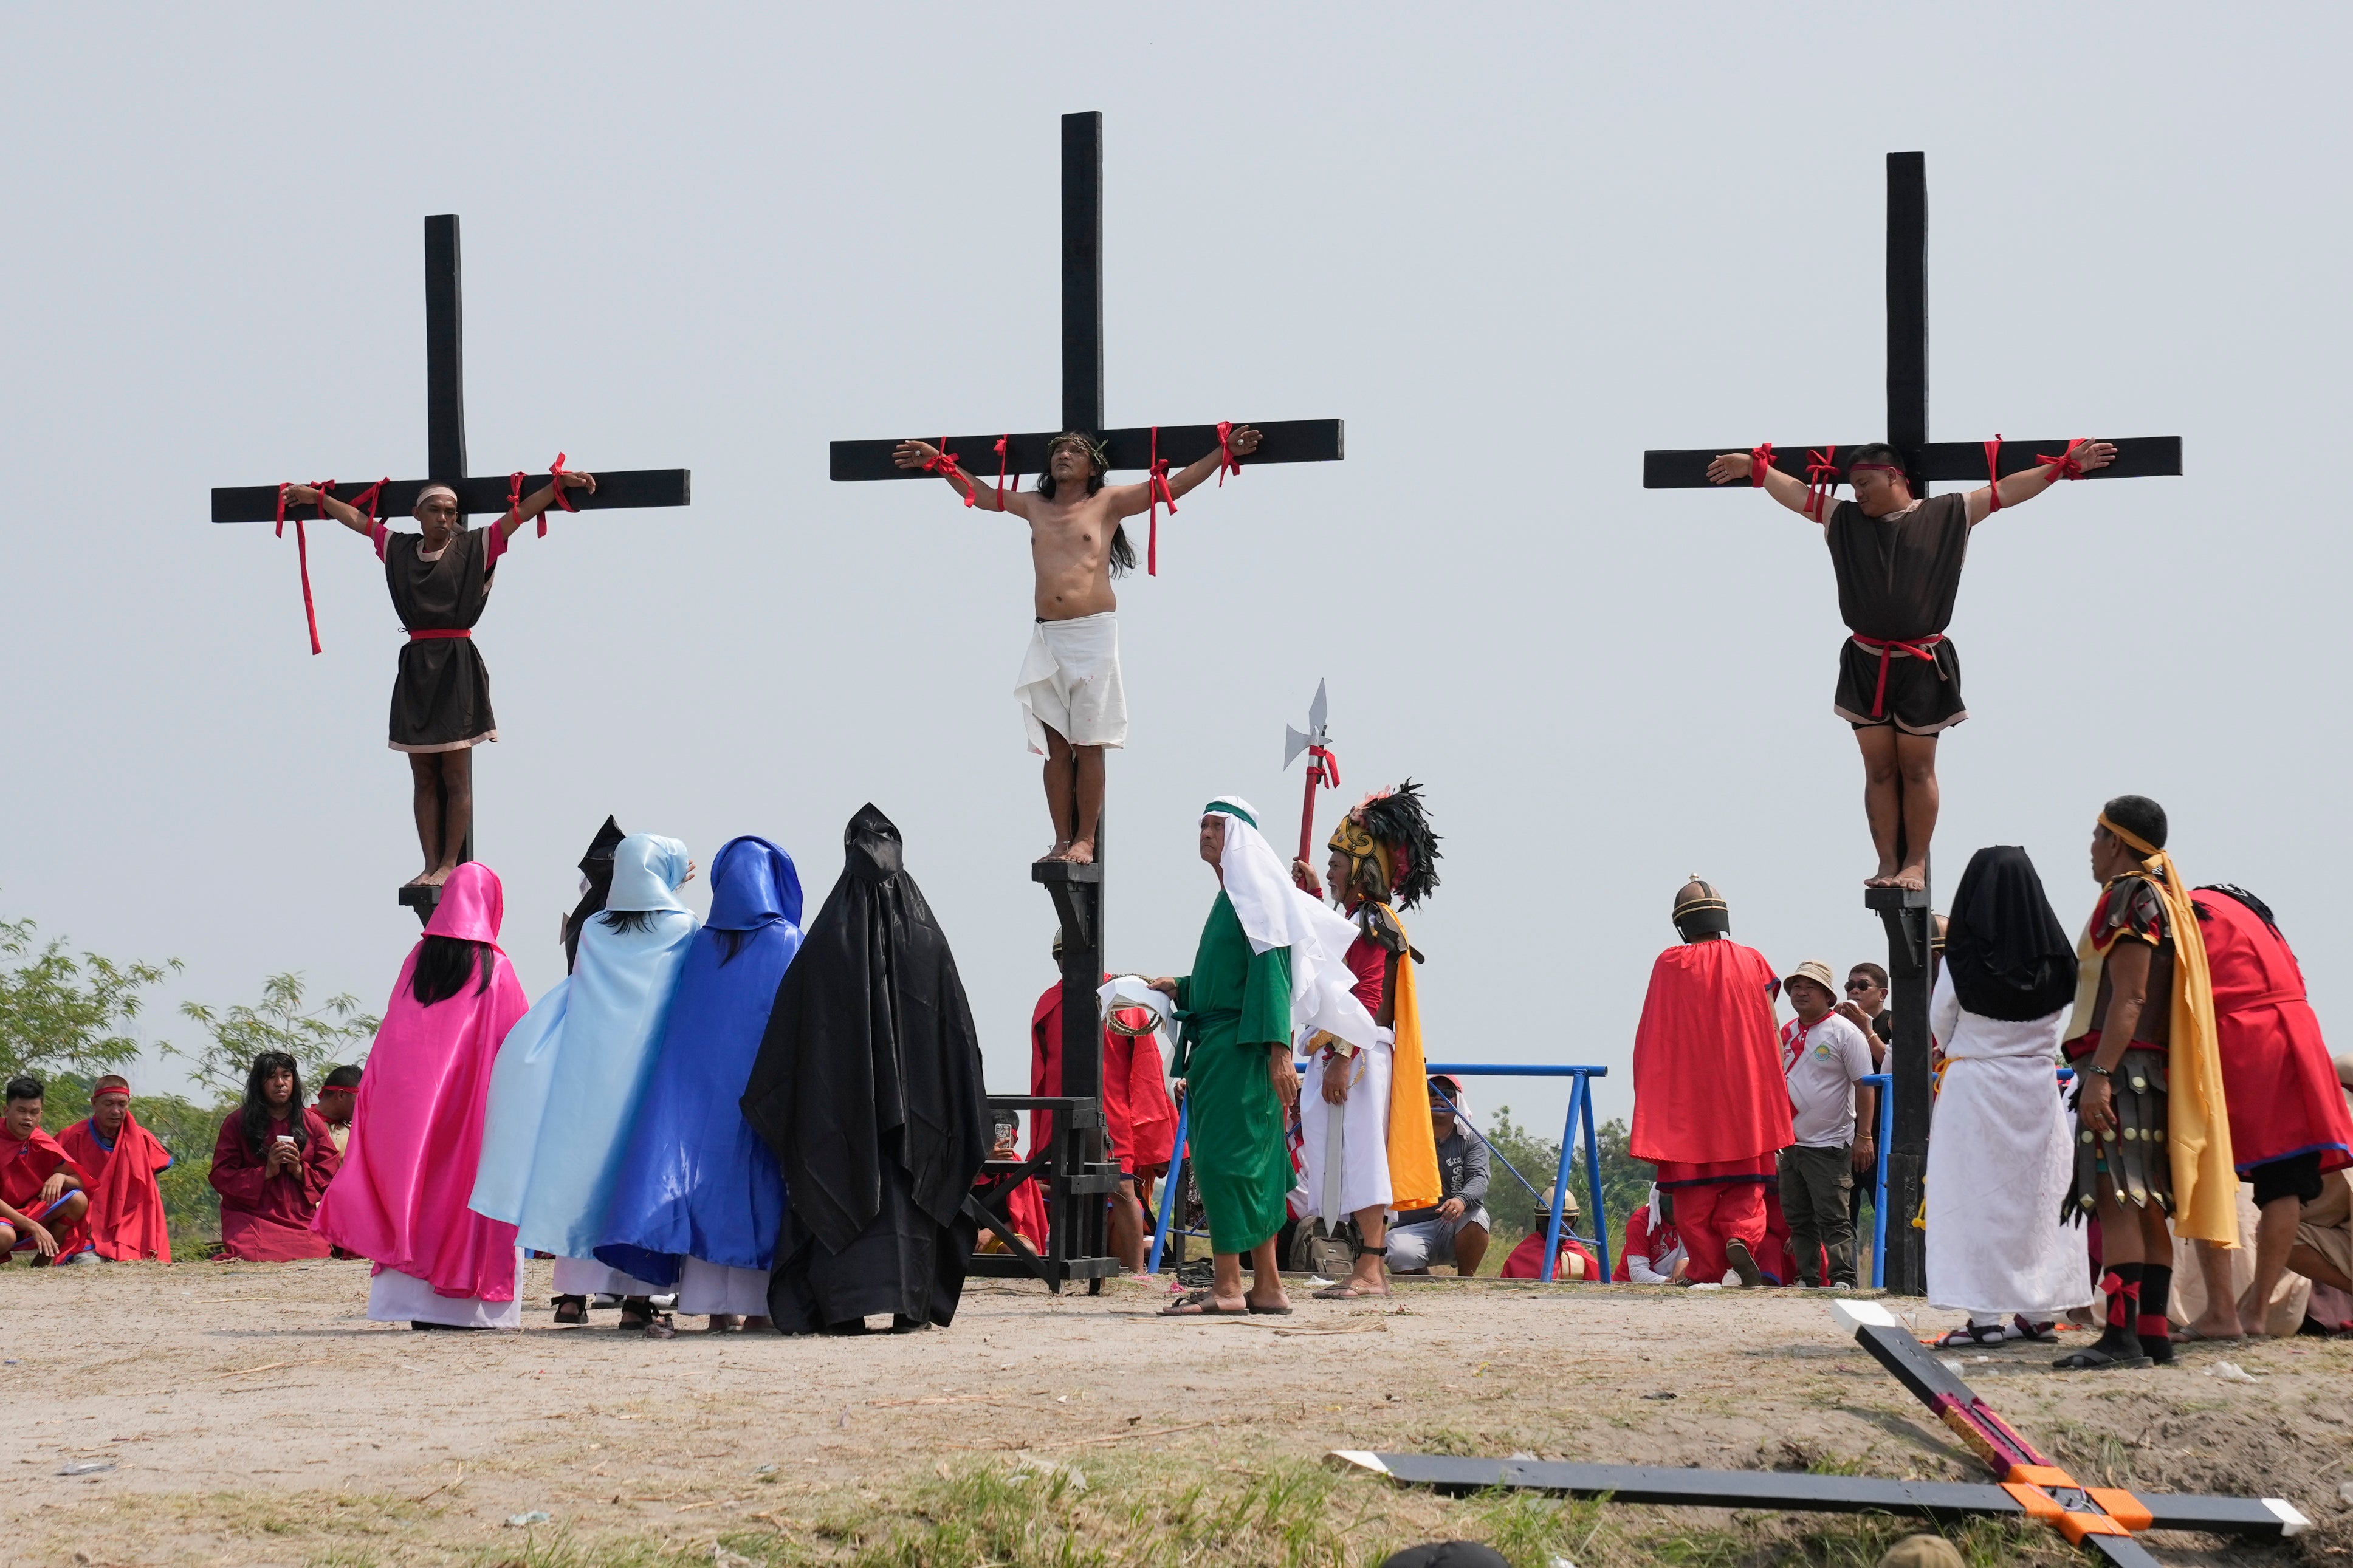 Ruben Enaje, centre, stays on the cross beside two other devotees during a reenactment of Jesus Christ’s sufferings as part of Good Friday rituals